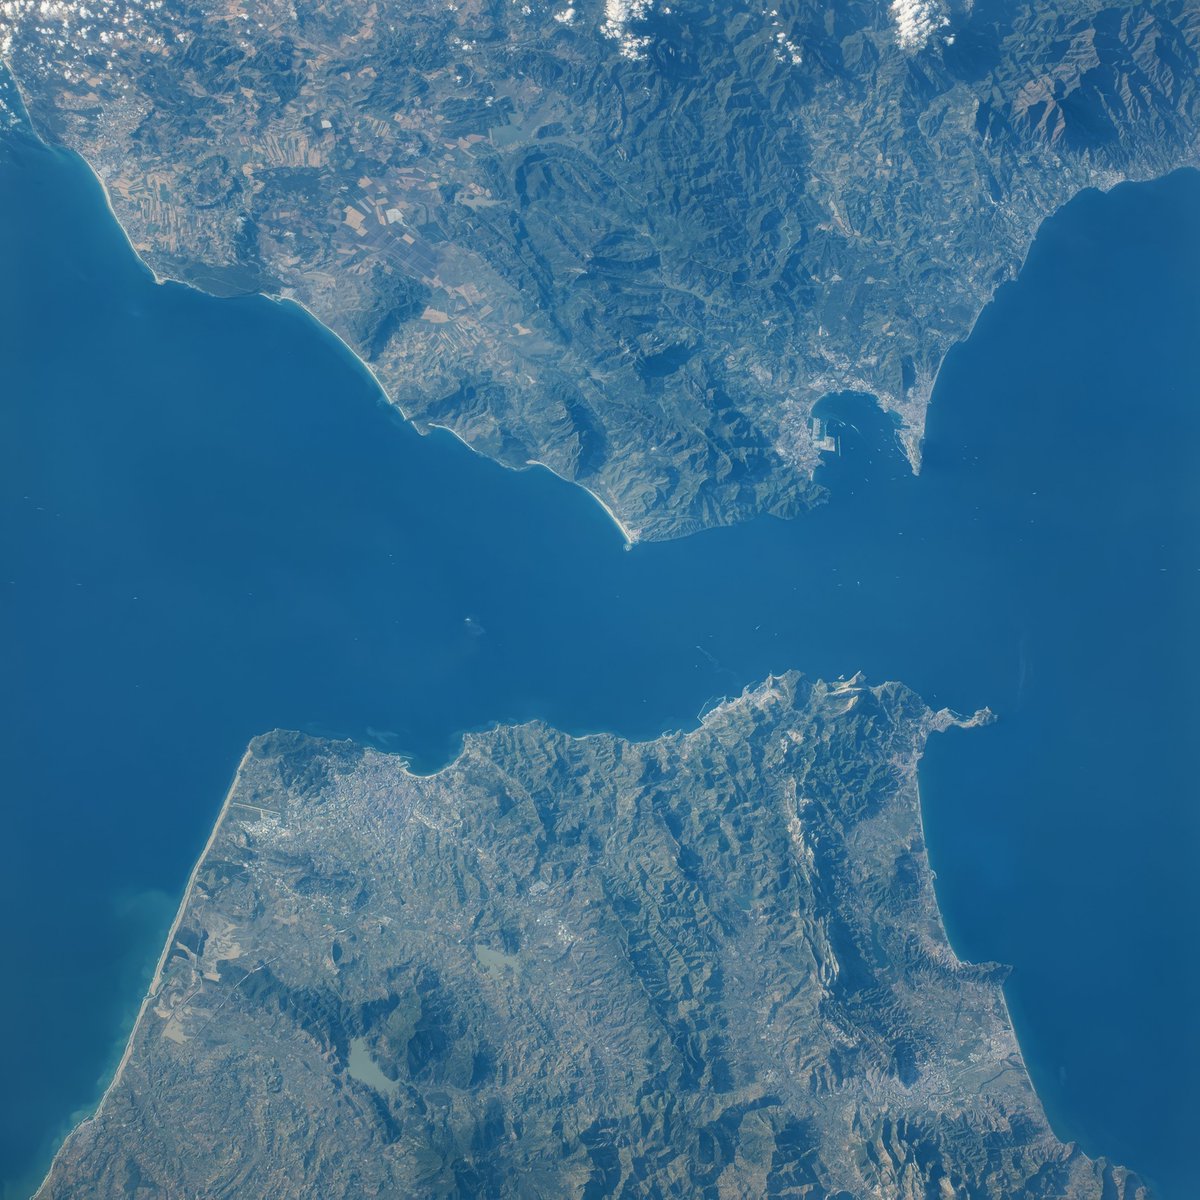 This is the Strait of Gibraltar as seen from Space, where Europe and Africa meet, and the Mediterranean Sea connects with the Atlantic Ocean🌊